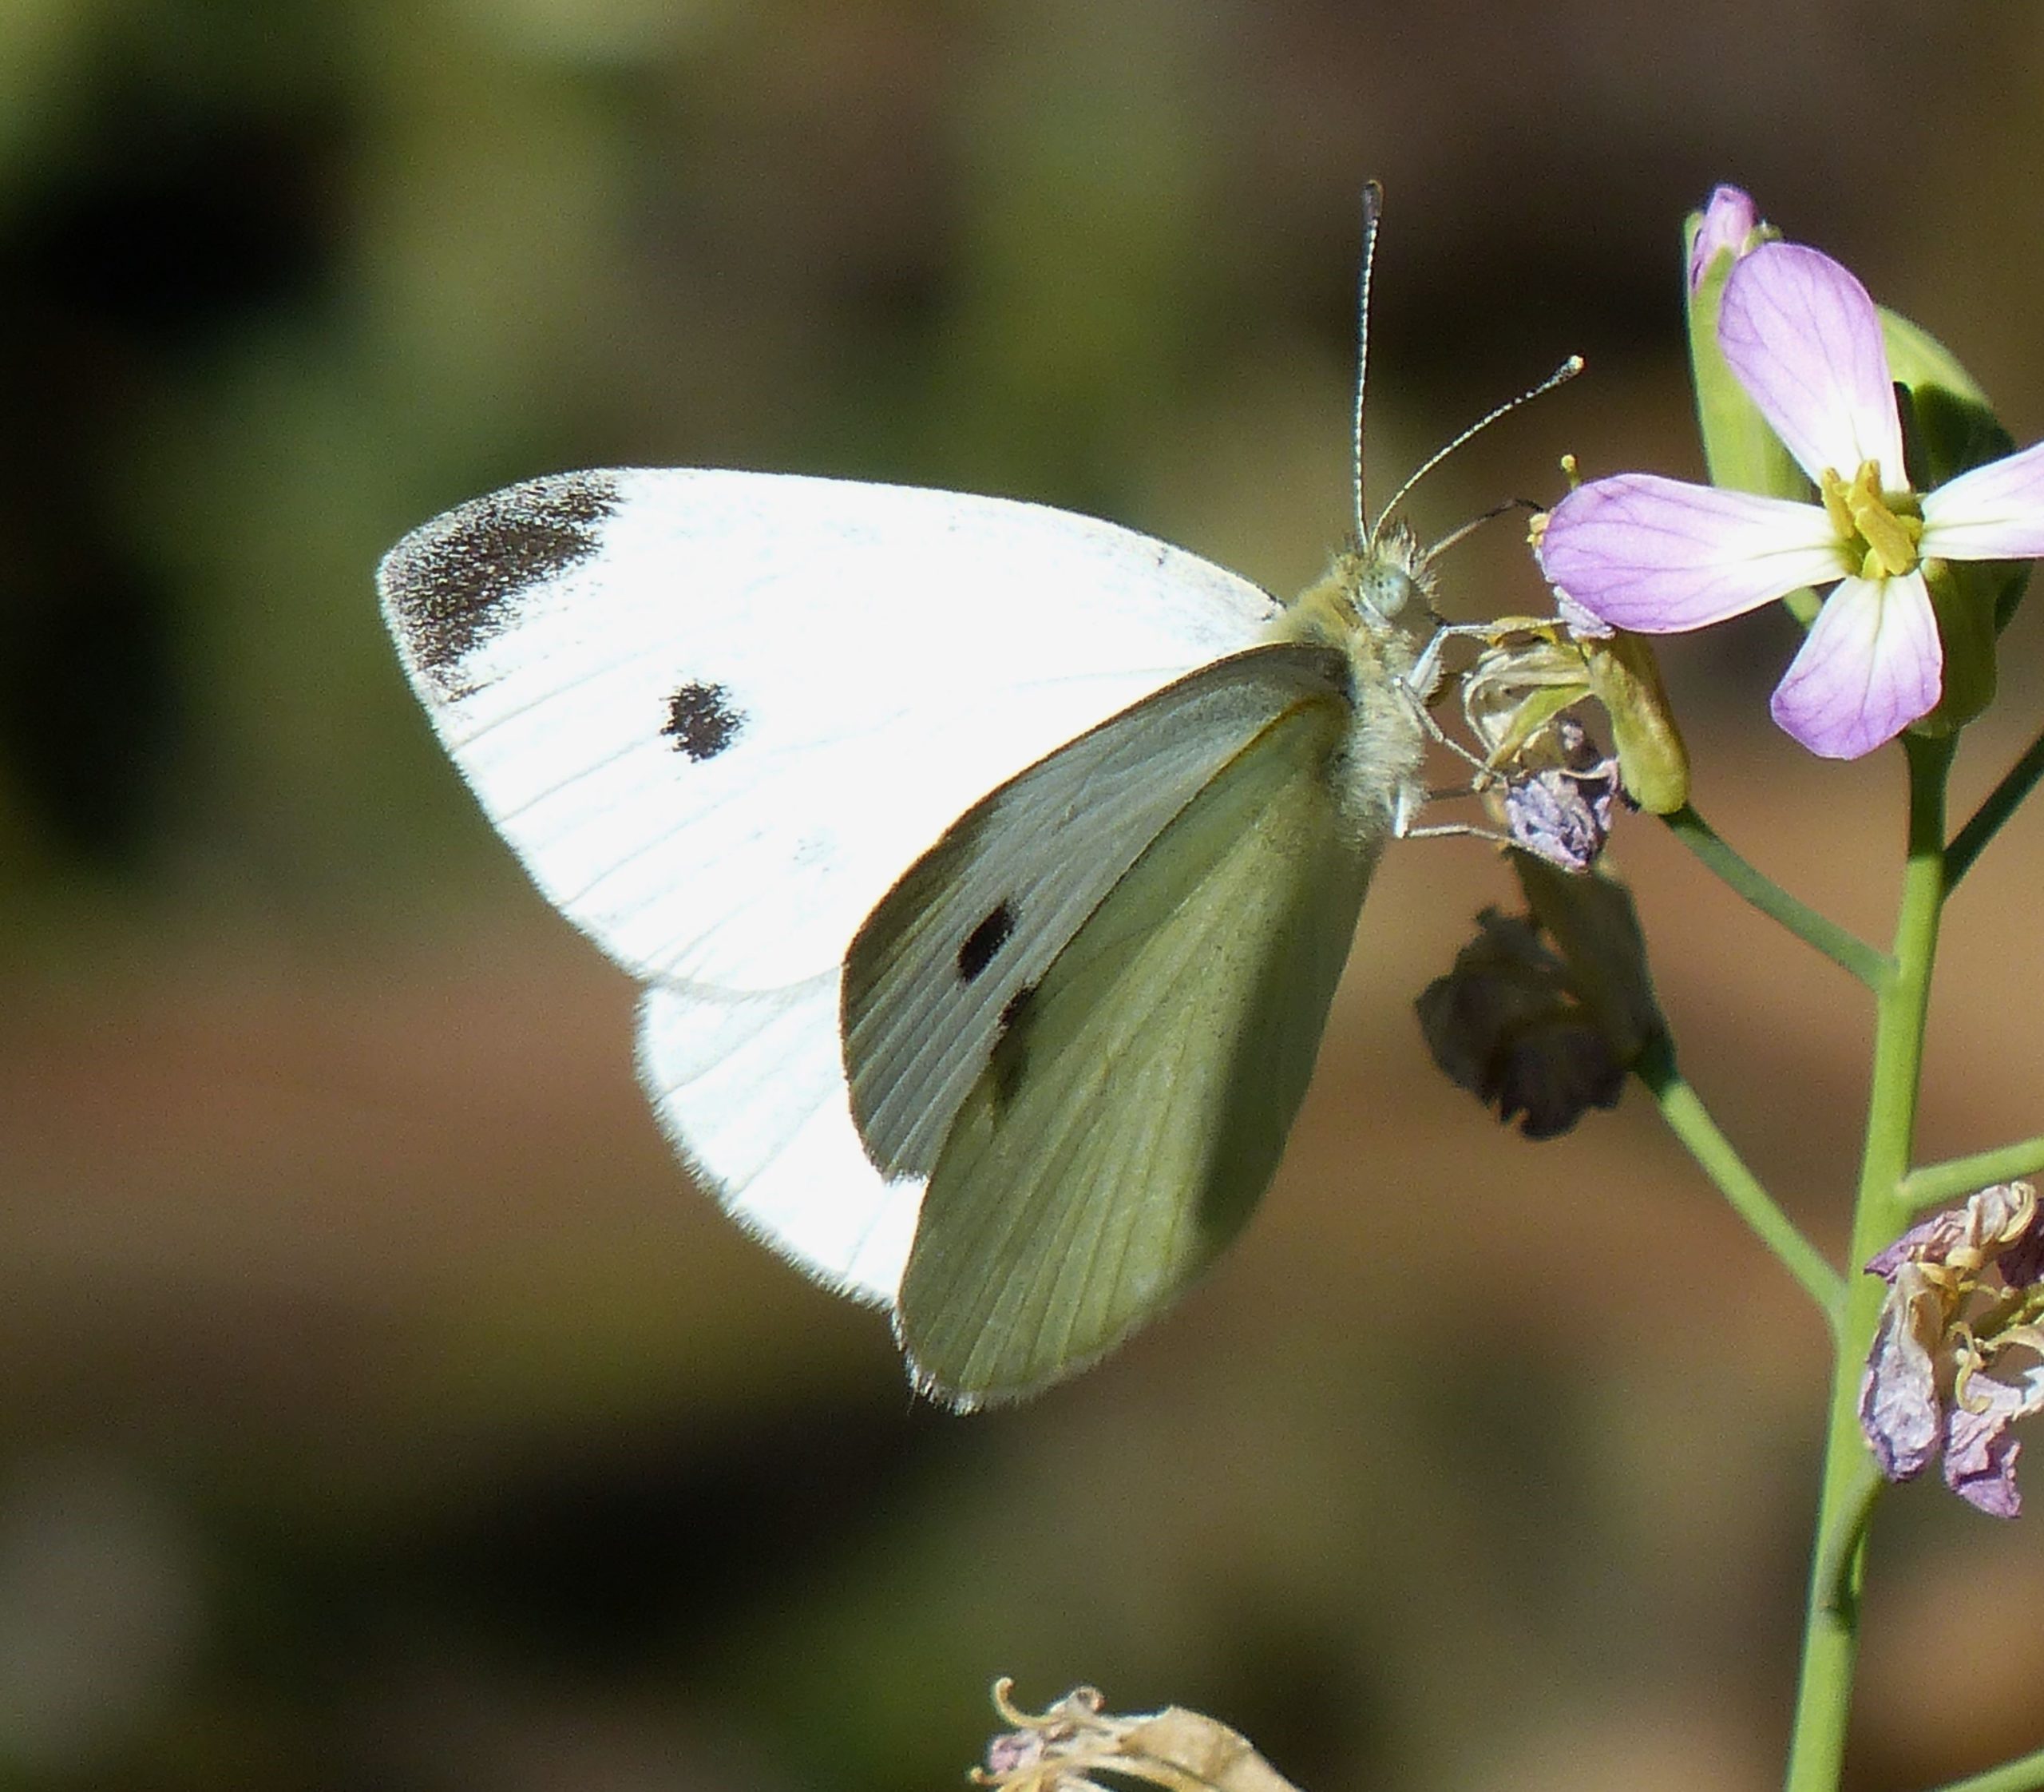 What does it mean if you keep seeing white butterflies?